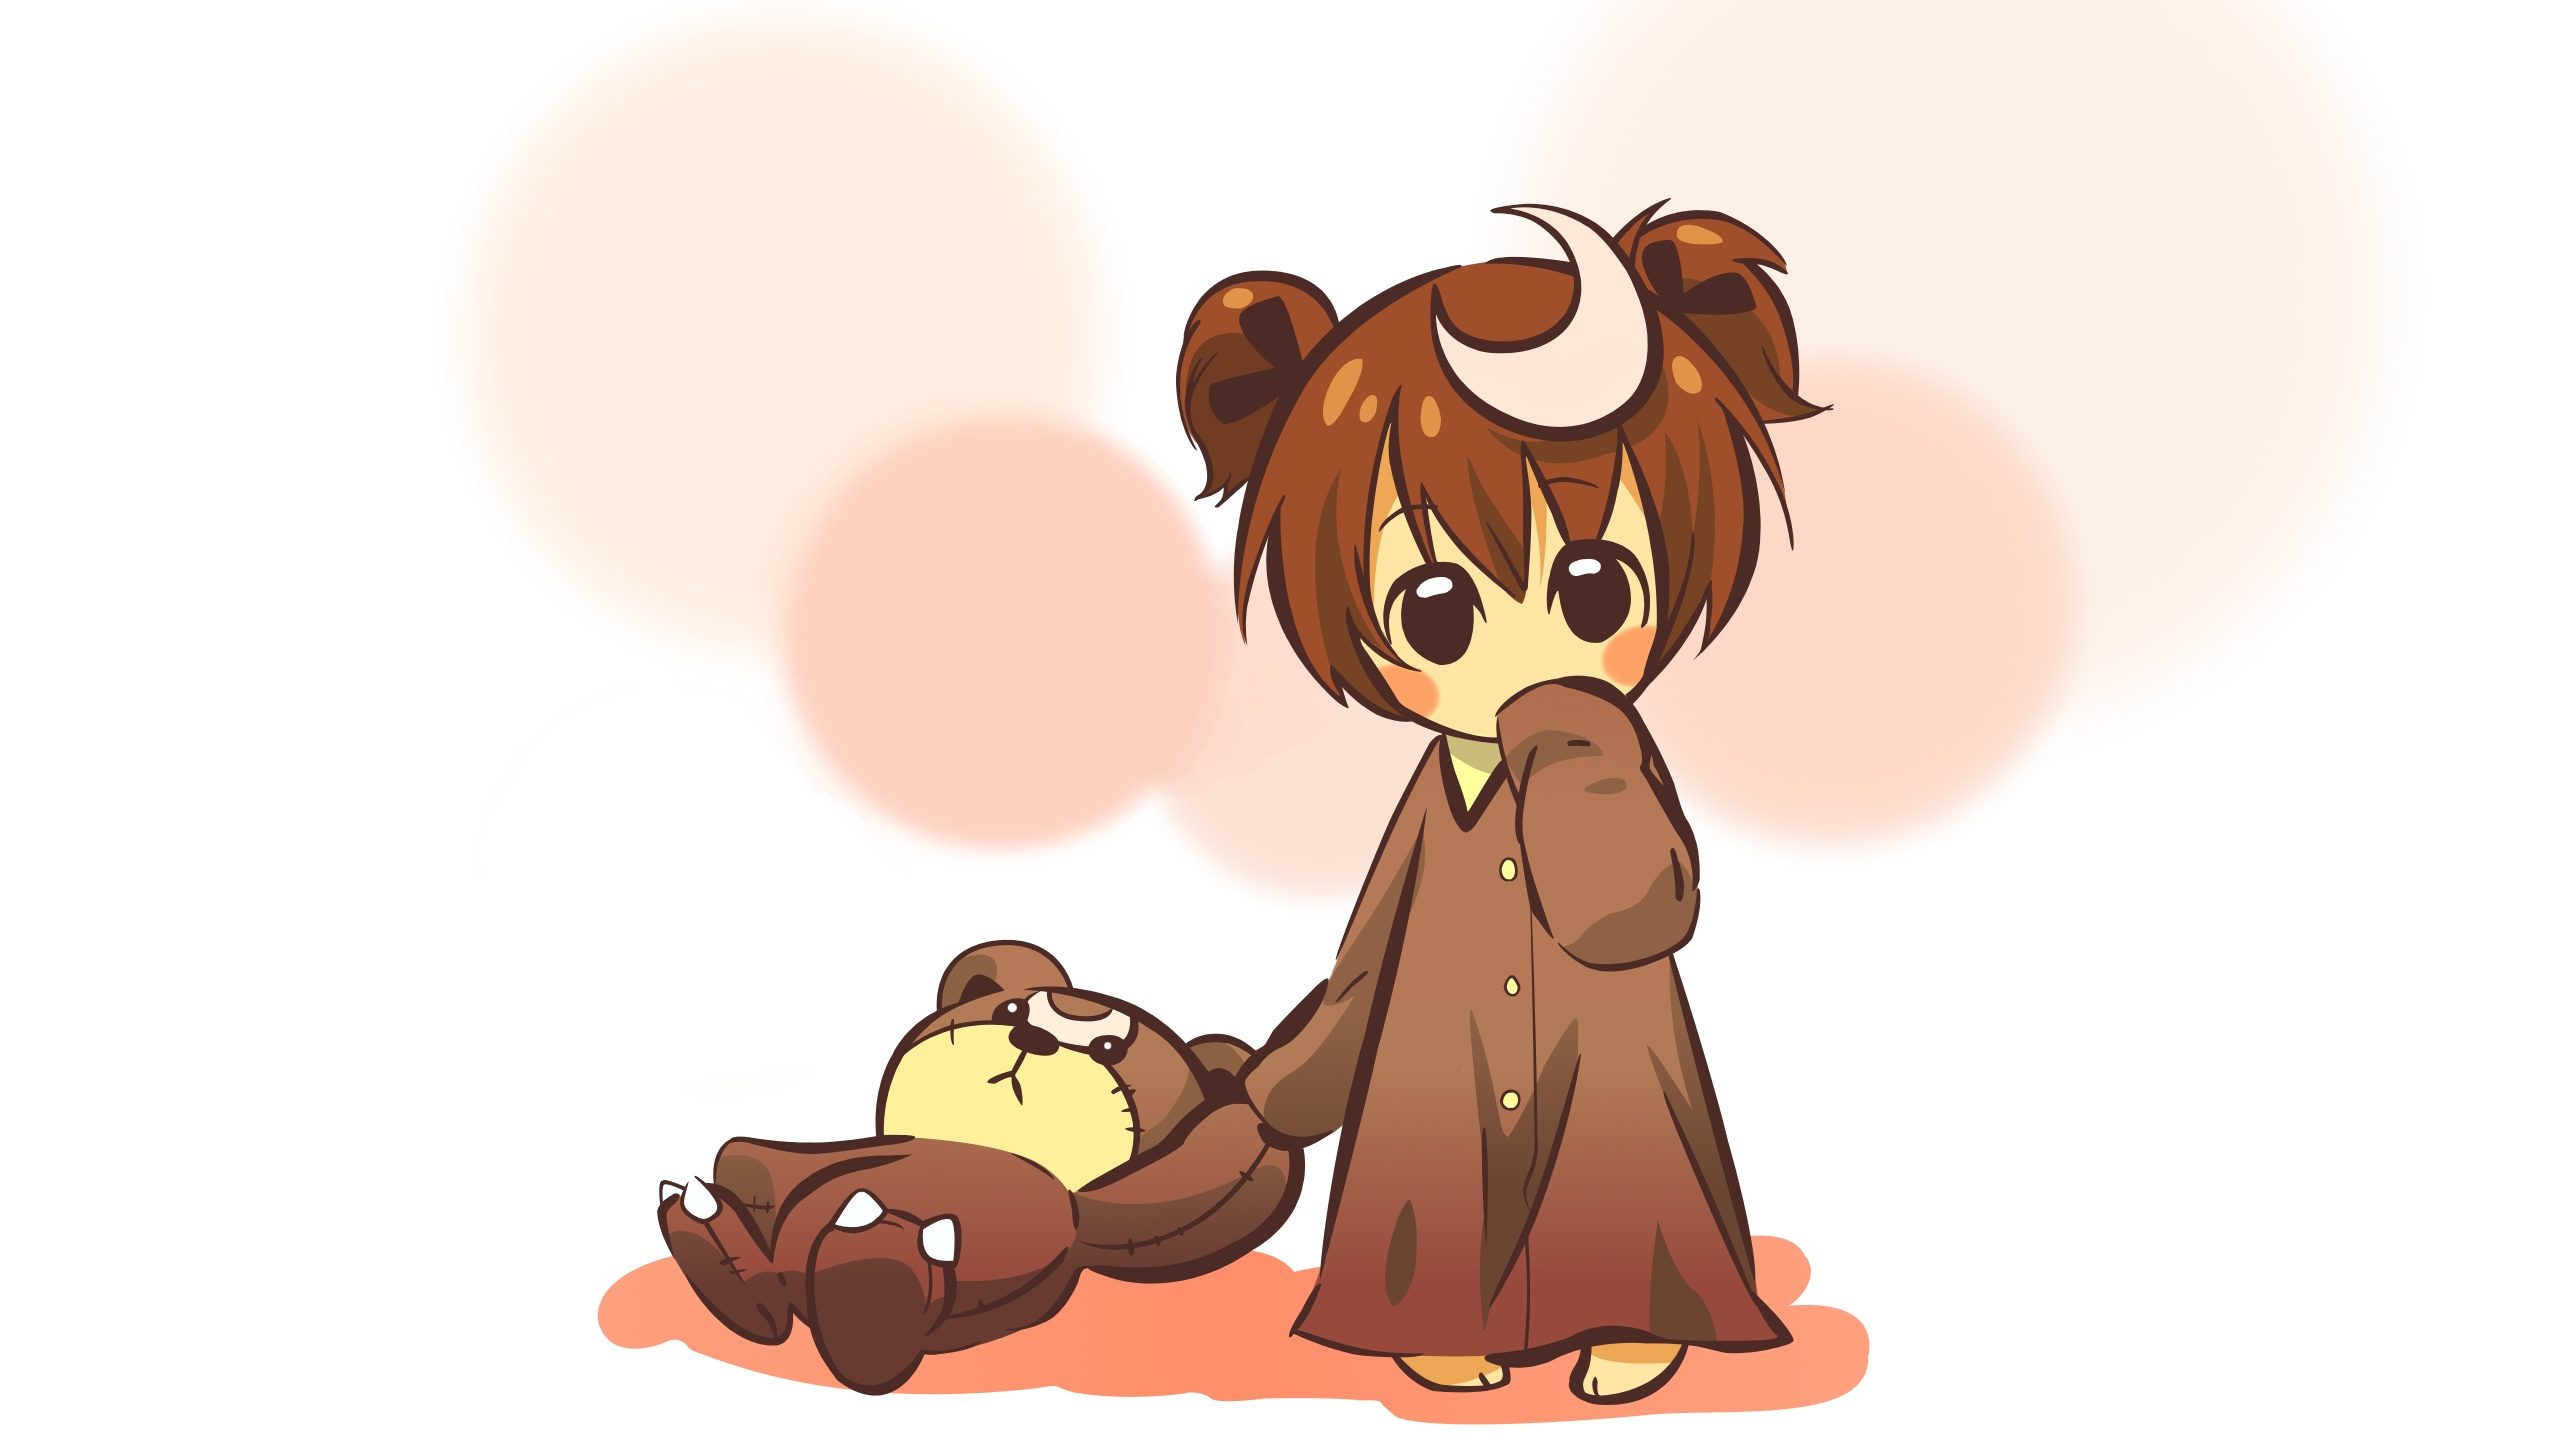 Brown Haired Girl in Brown Dress Illustration. Wallpaper in 2560x1440 Resolution